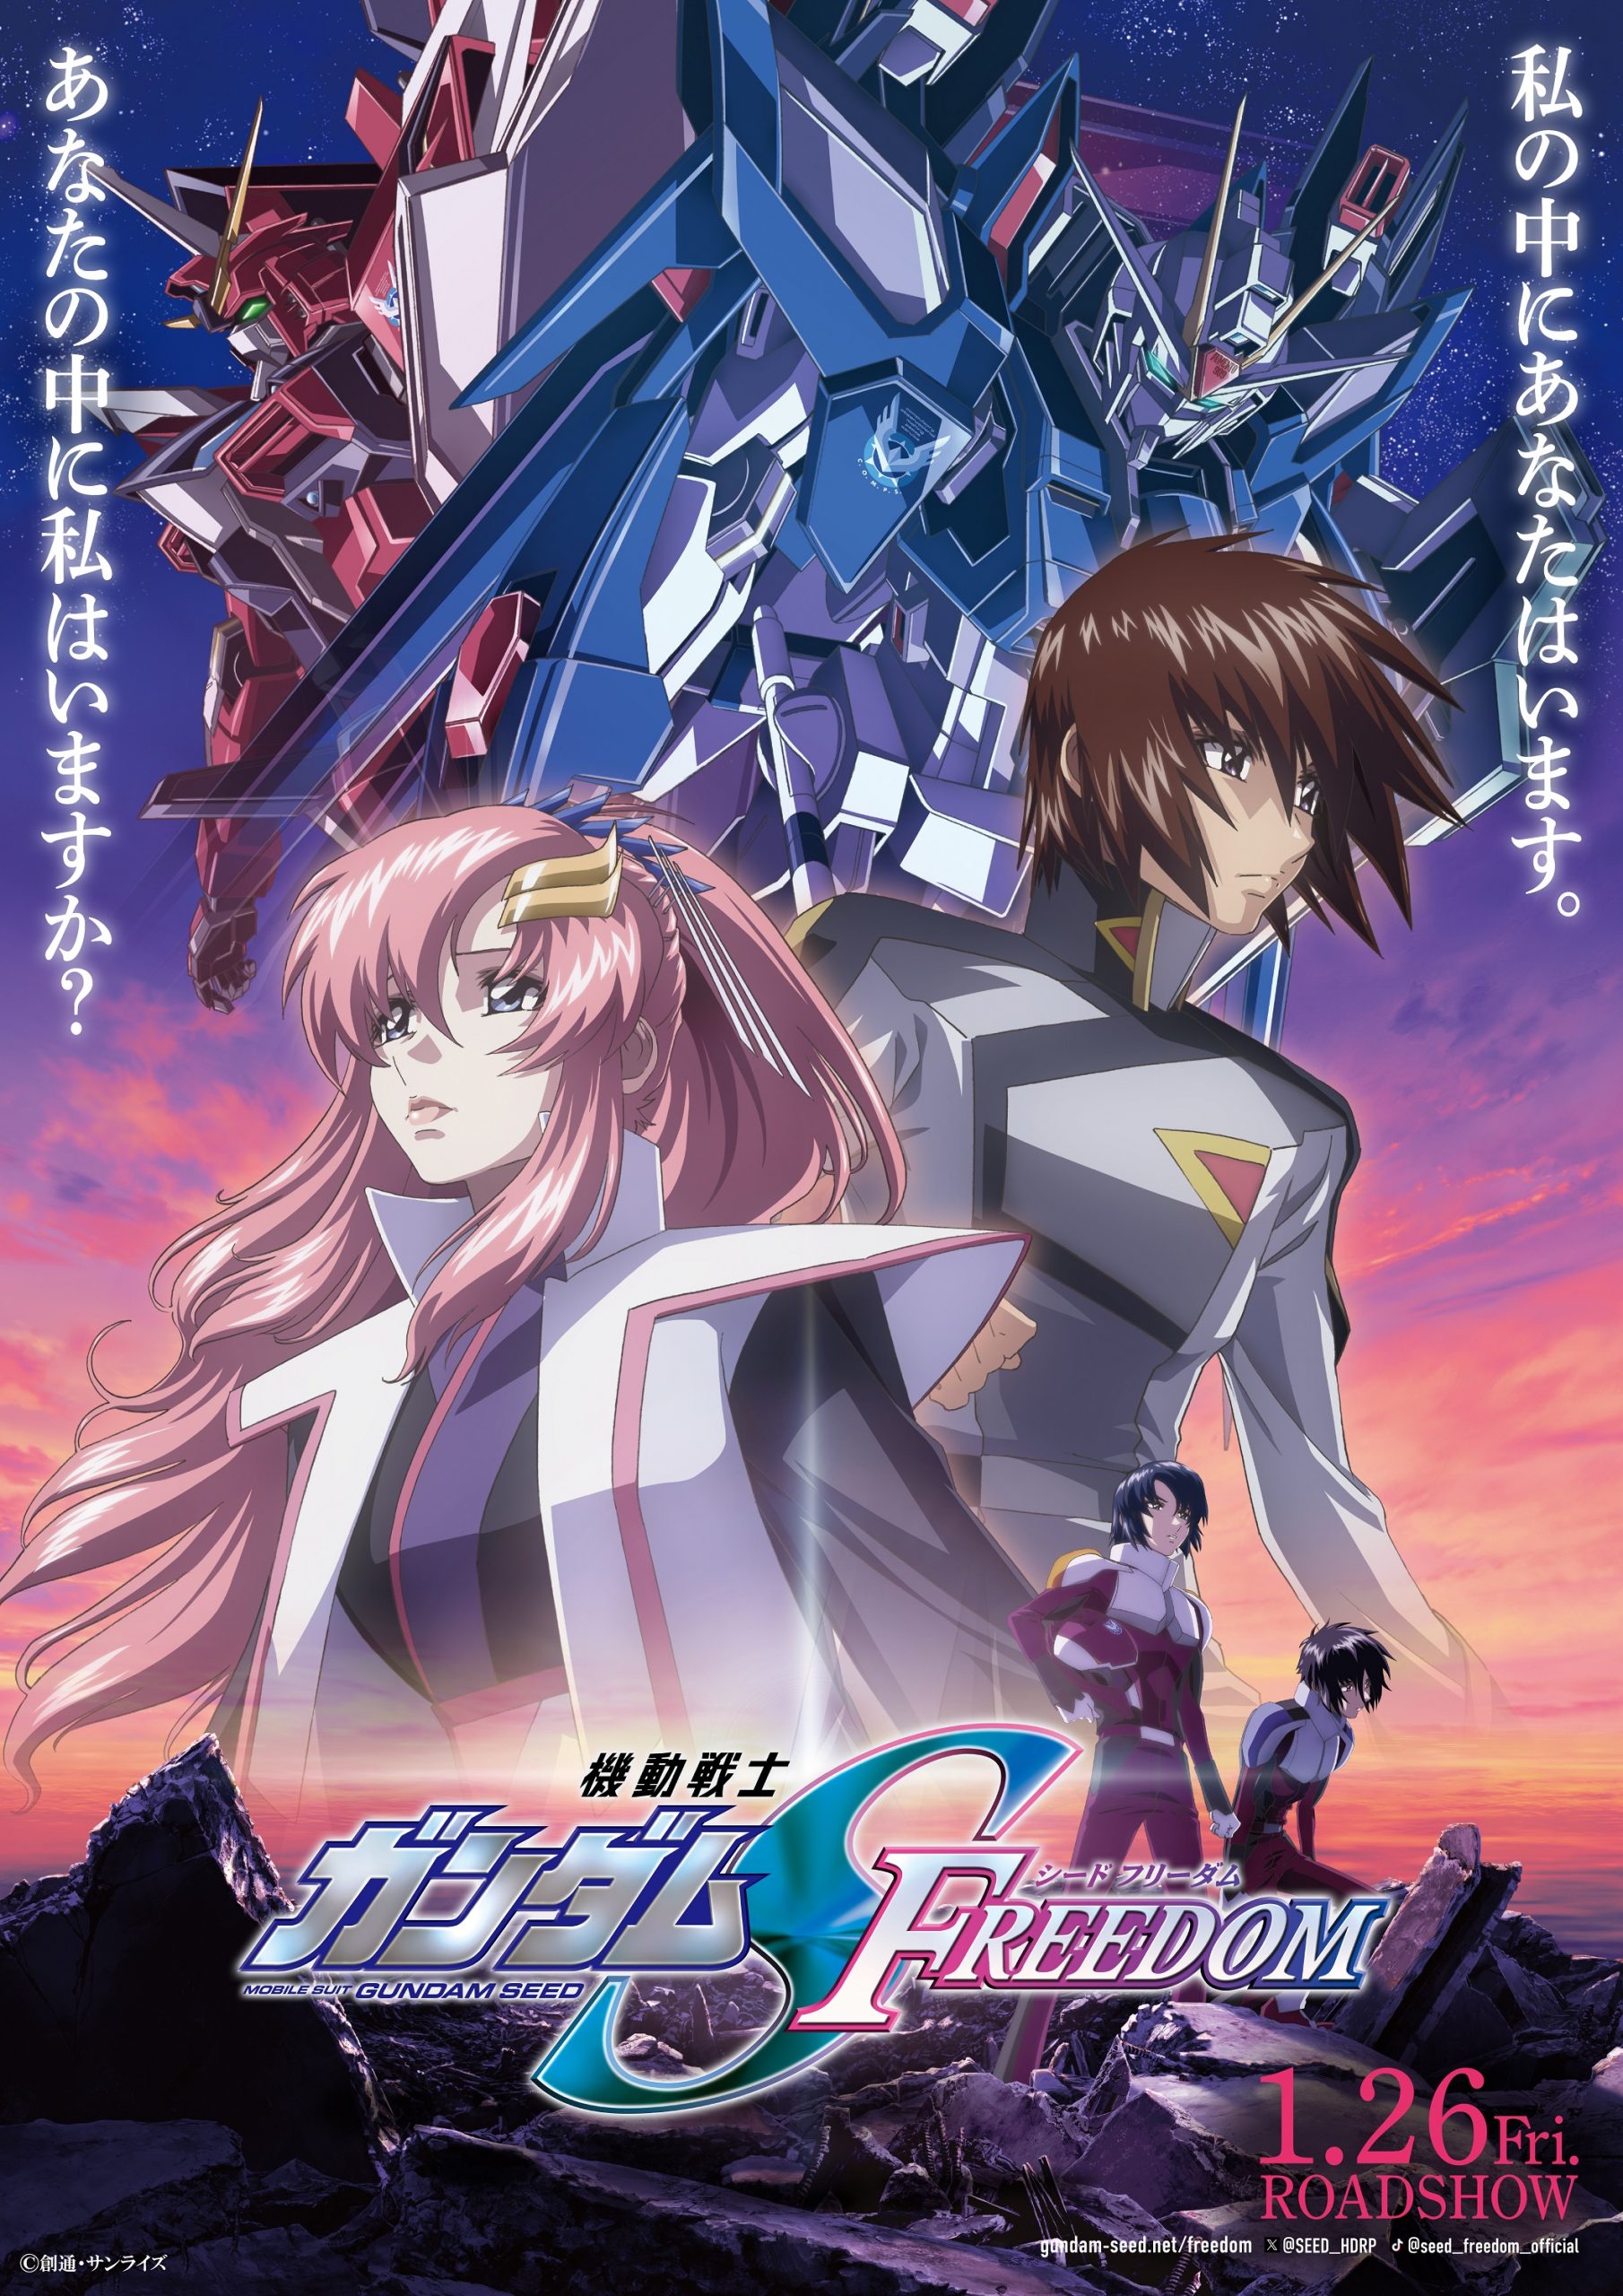 See-Saw-Artist-Photo See-Saw Returns with First Mobile Suit Gundam SEED Song in 19 Years! “Sarigiwa no Romantics” Chosen as  Ending Theme Song for Mobile Suit Gundam SEED Freedom